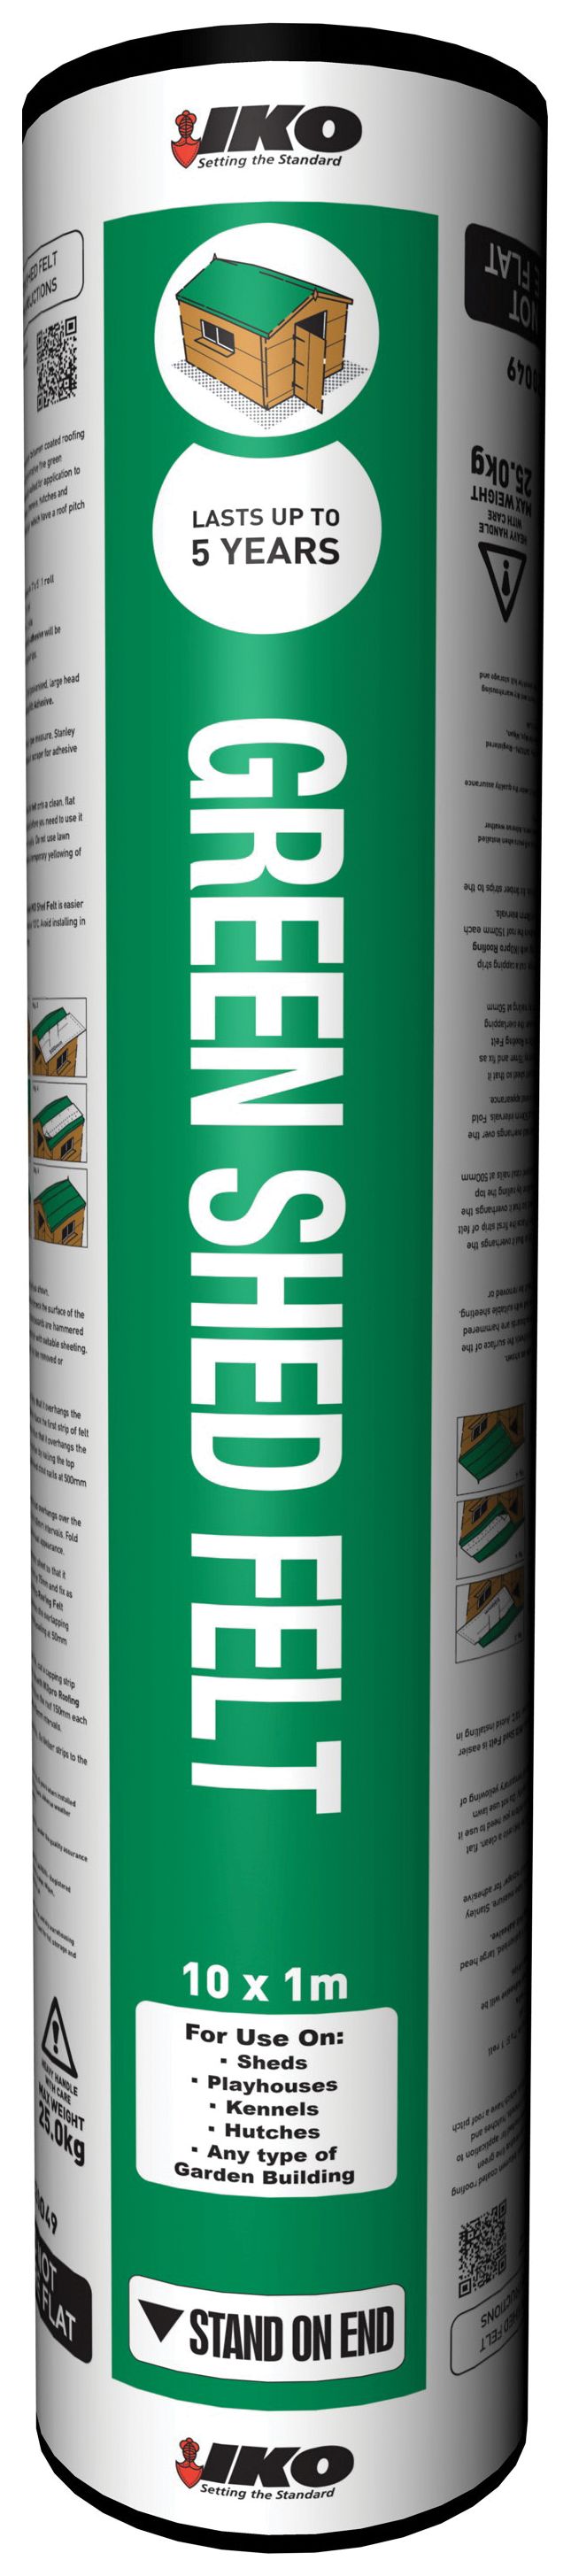 Image of IKO Green Mineral Shed Felt Roll - 10 x 1m